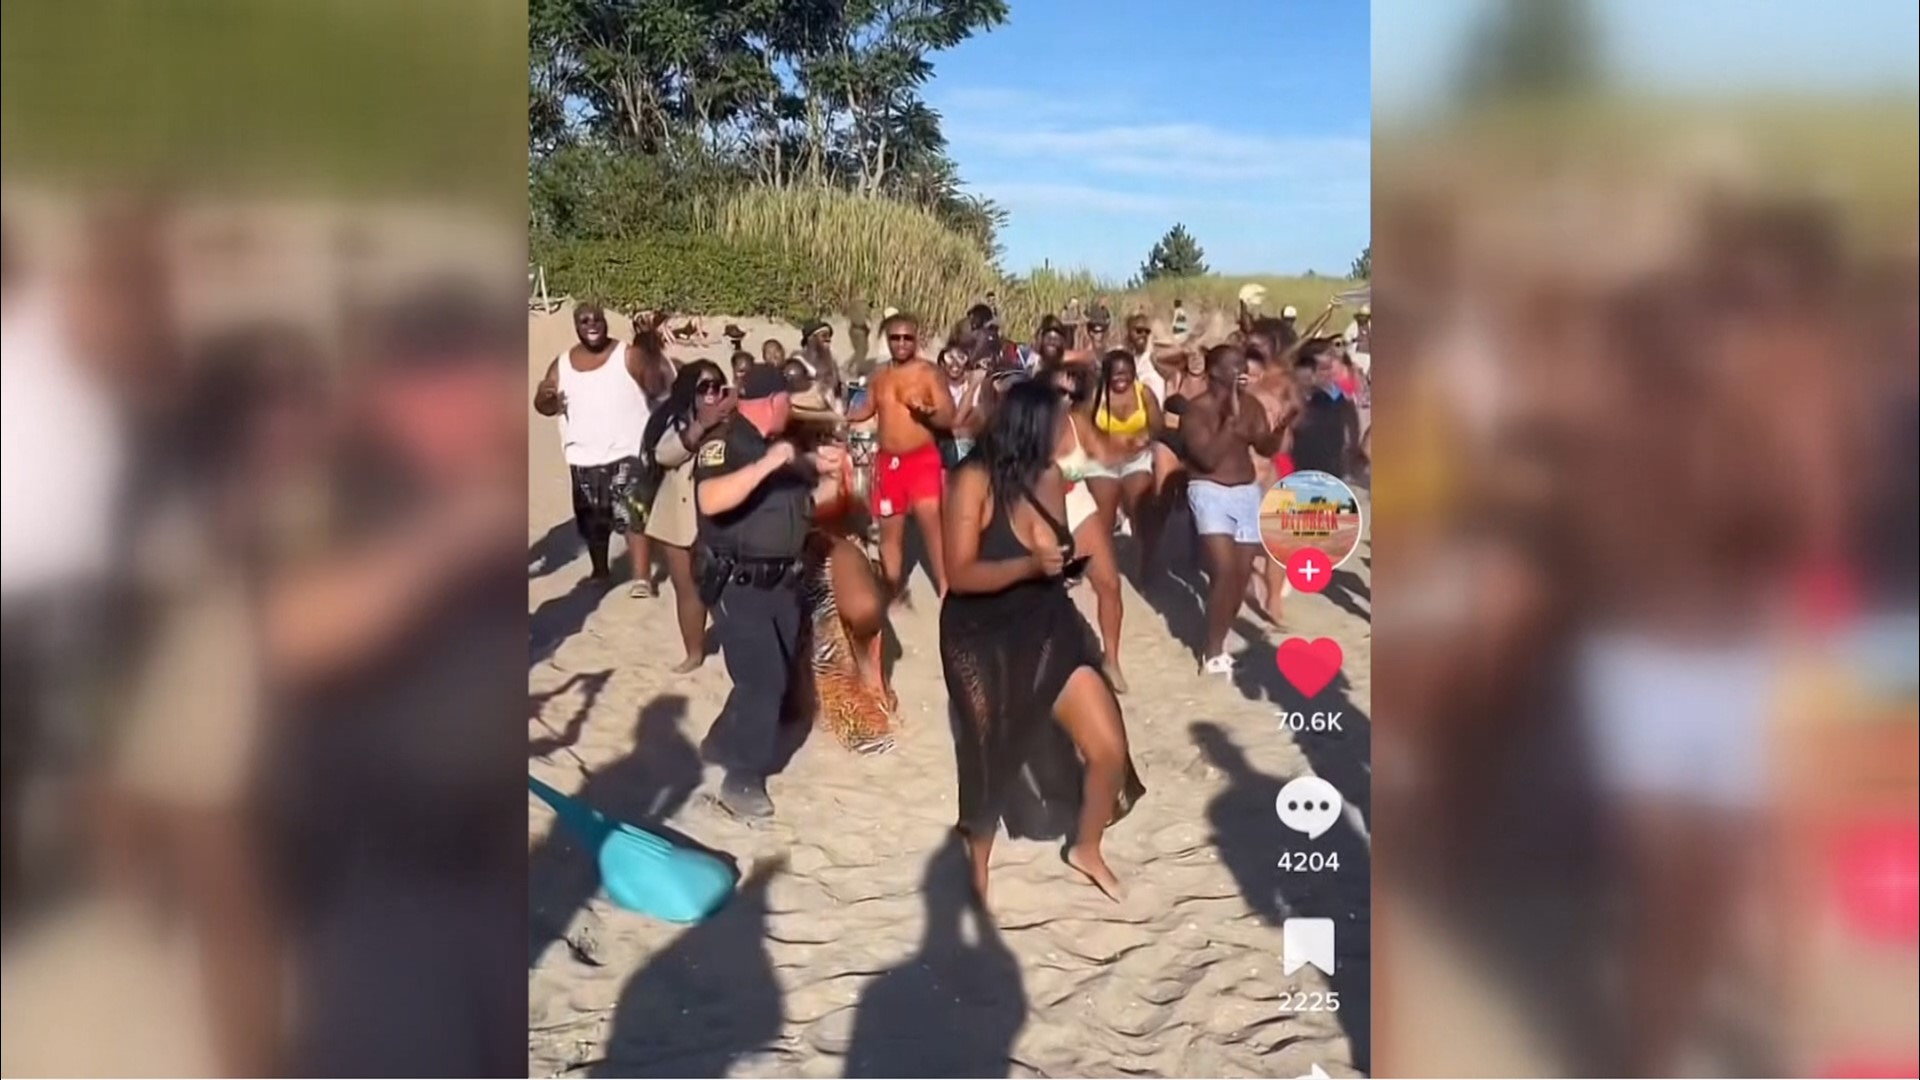 Dozens of police were called to Hammonsaset Beach over a party being held.